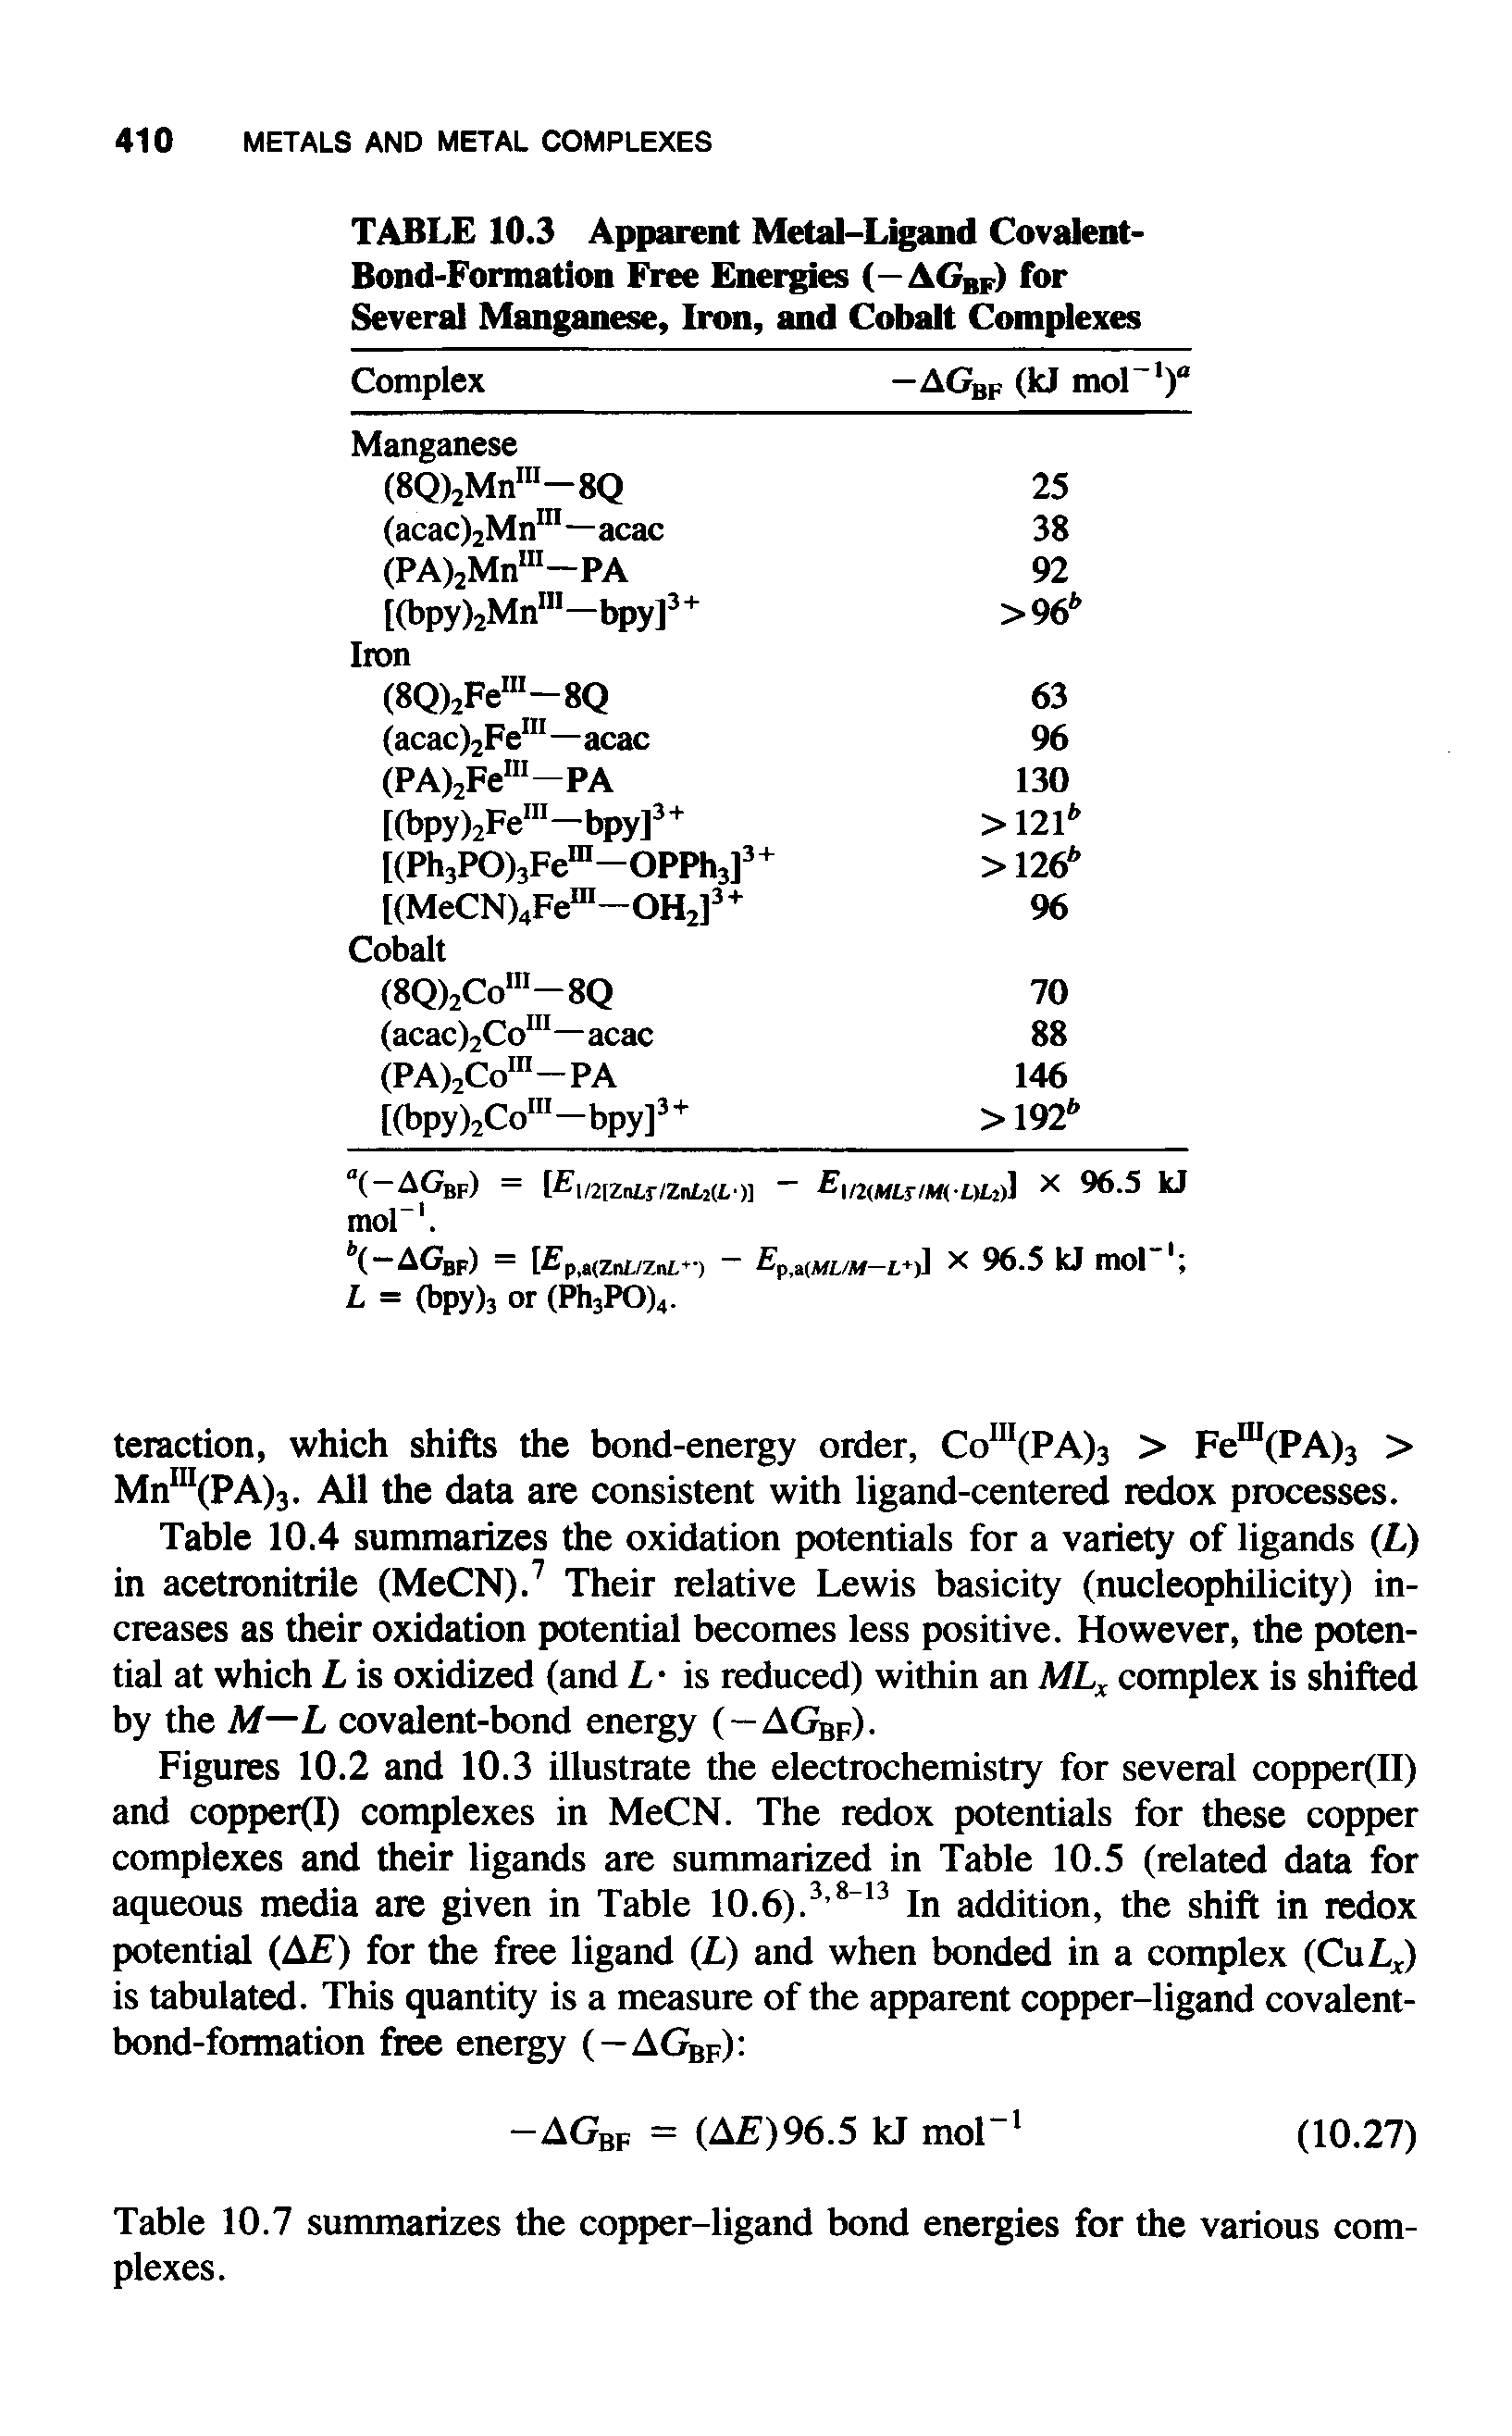 Figures 10.2 and 10.3 illustrate the electrochemistry for several copper(II) and copper complexes in MeCN. The redox potentials for these copper complexes and their ligands are summarized in Table 10.5 (related data for aqueous media are given in Table 10.6).3,8-13 In addition, the shift in redox potential (AE) for the free ligand (L) and when bonded in a complex (CuL ) is tabulated. This quantity is a measure of the apparent copper-ligand covalent-bond-formation free energy (—AGBF) ...